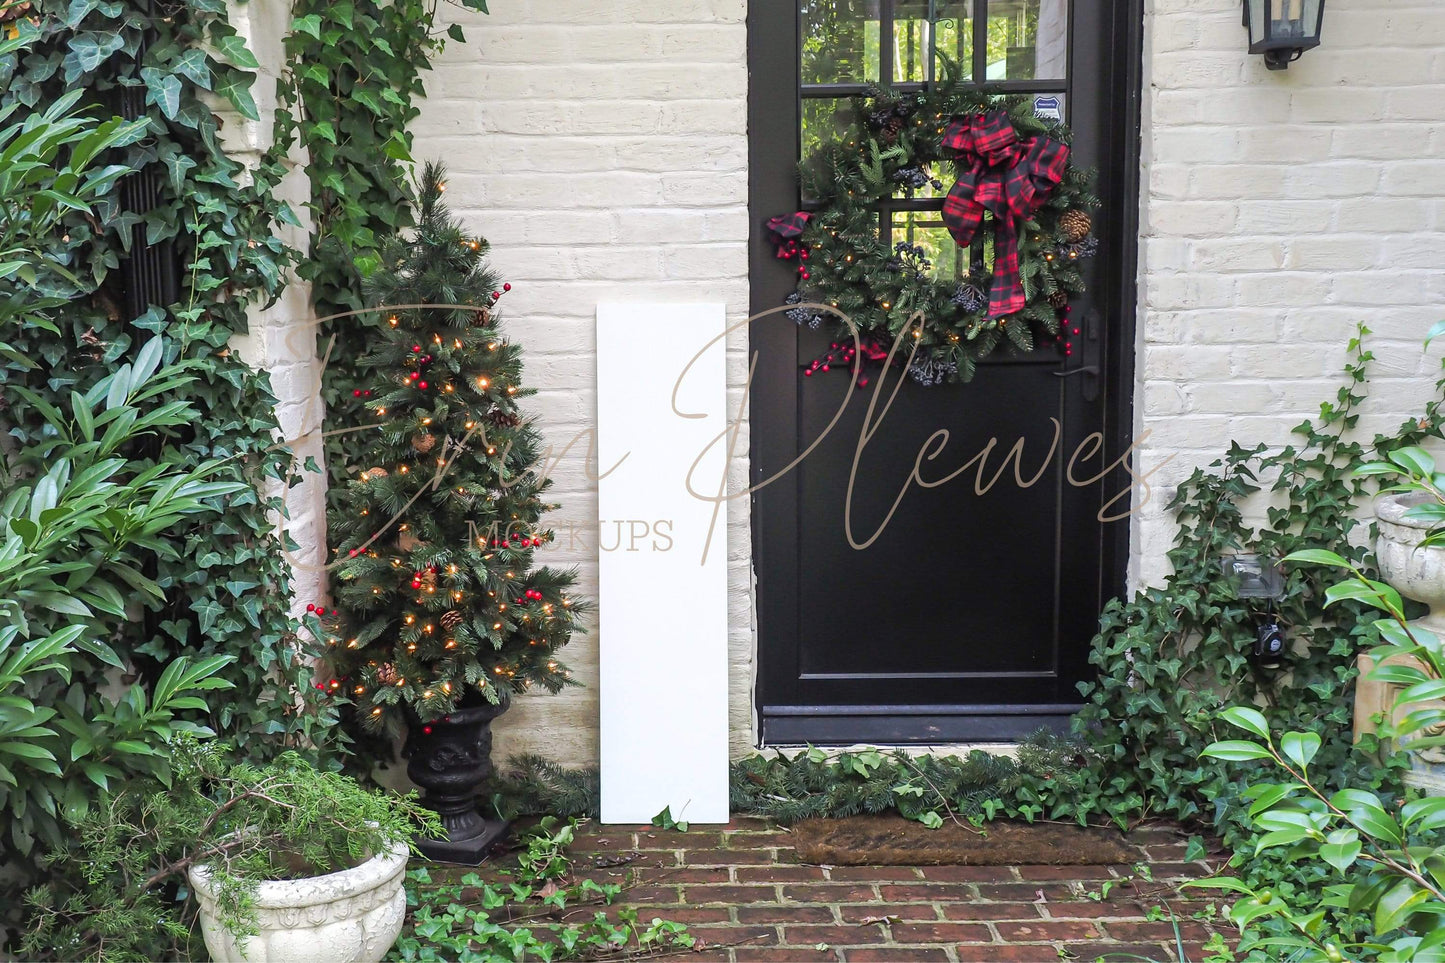 Erin Plewes Mockups Porch Sign Mockup White, Christmas Sign Mock Up, Vertical Sign Mock-up,  Xmas Styled Lifestyle Stock Photo Template